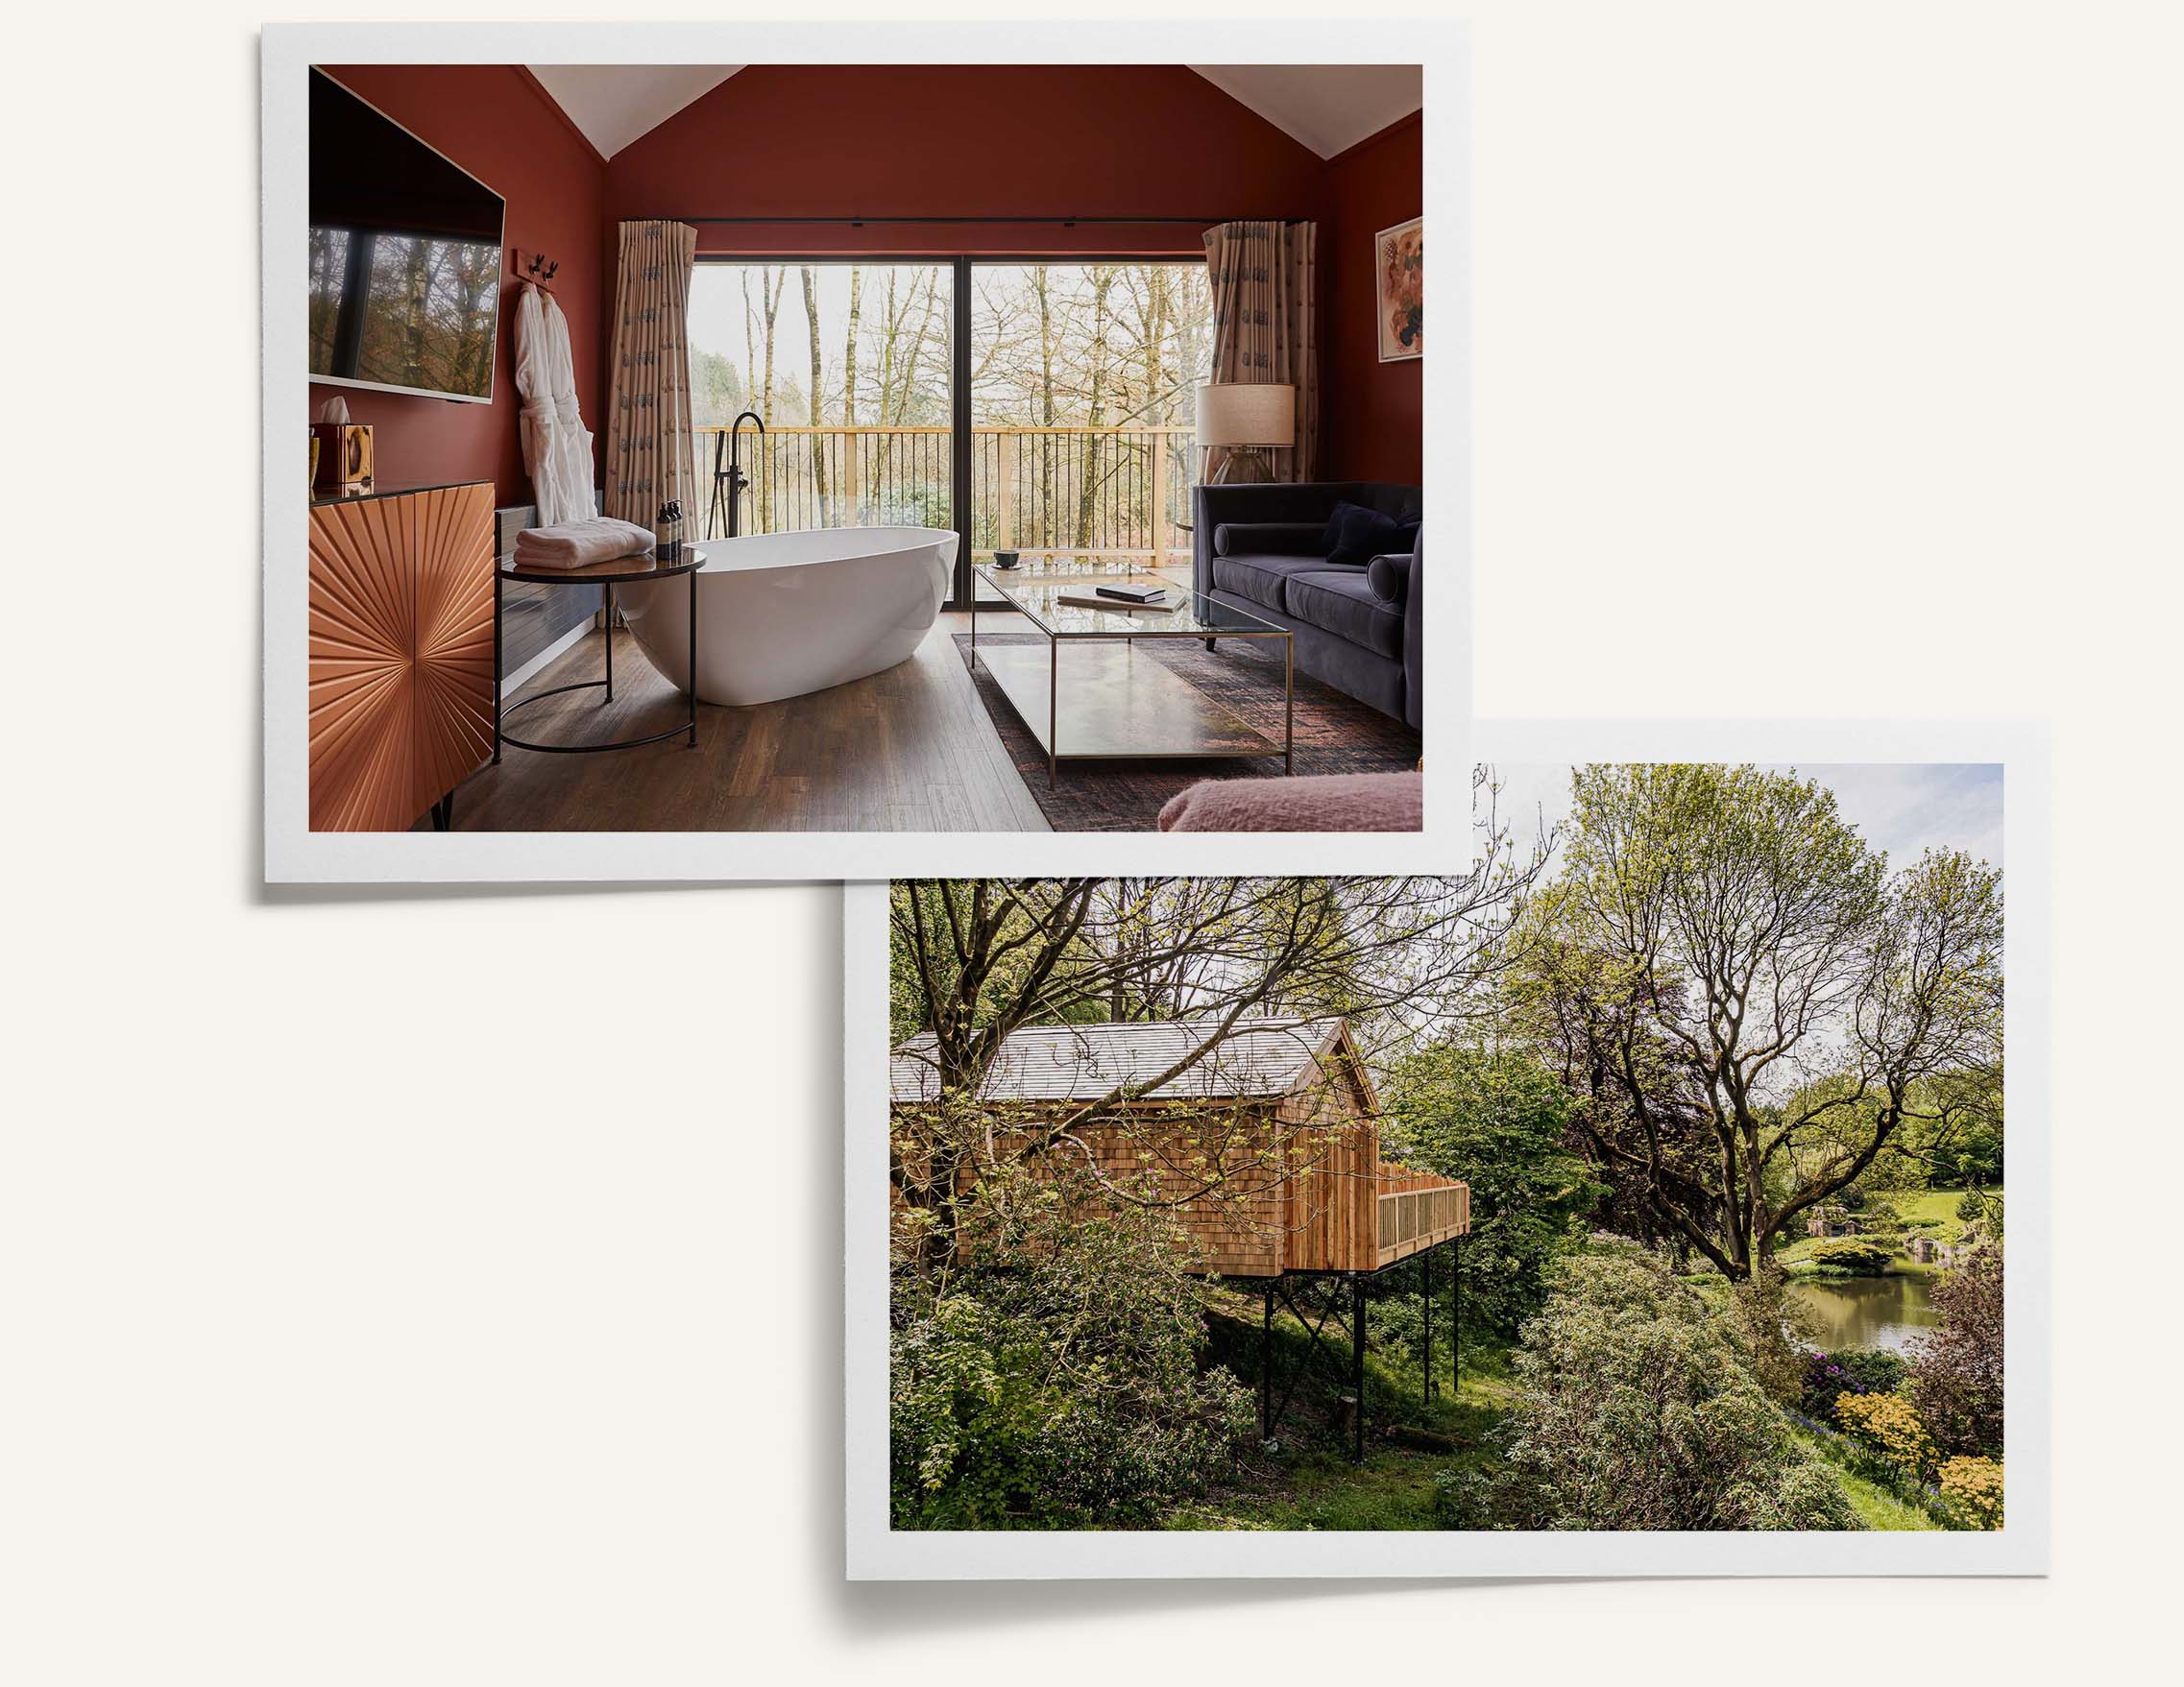 Two images show The Hillside Treehouse at The Tawny, including an external shot and an image of a red bedroom and freestanding bath tub.